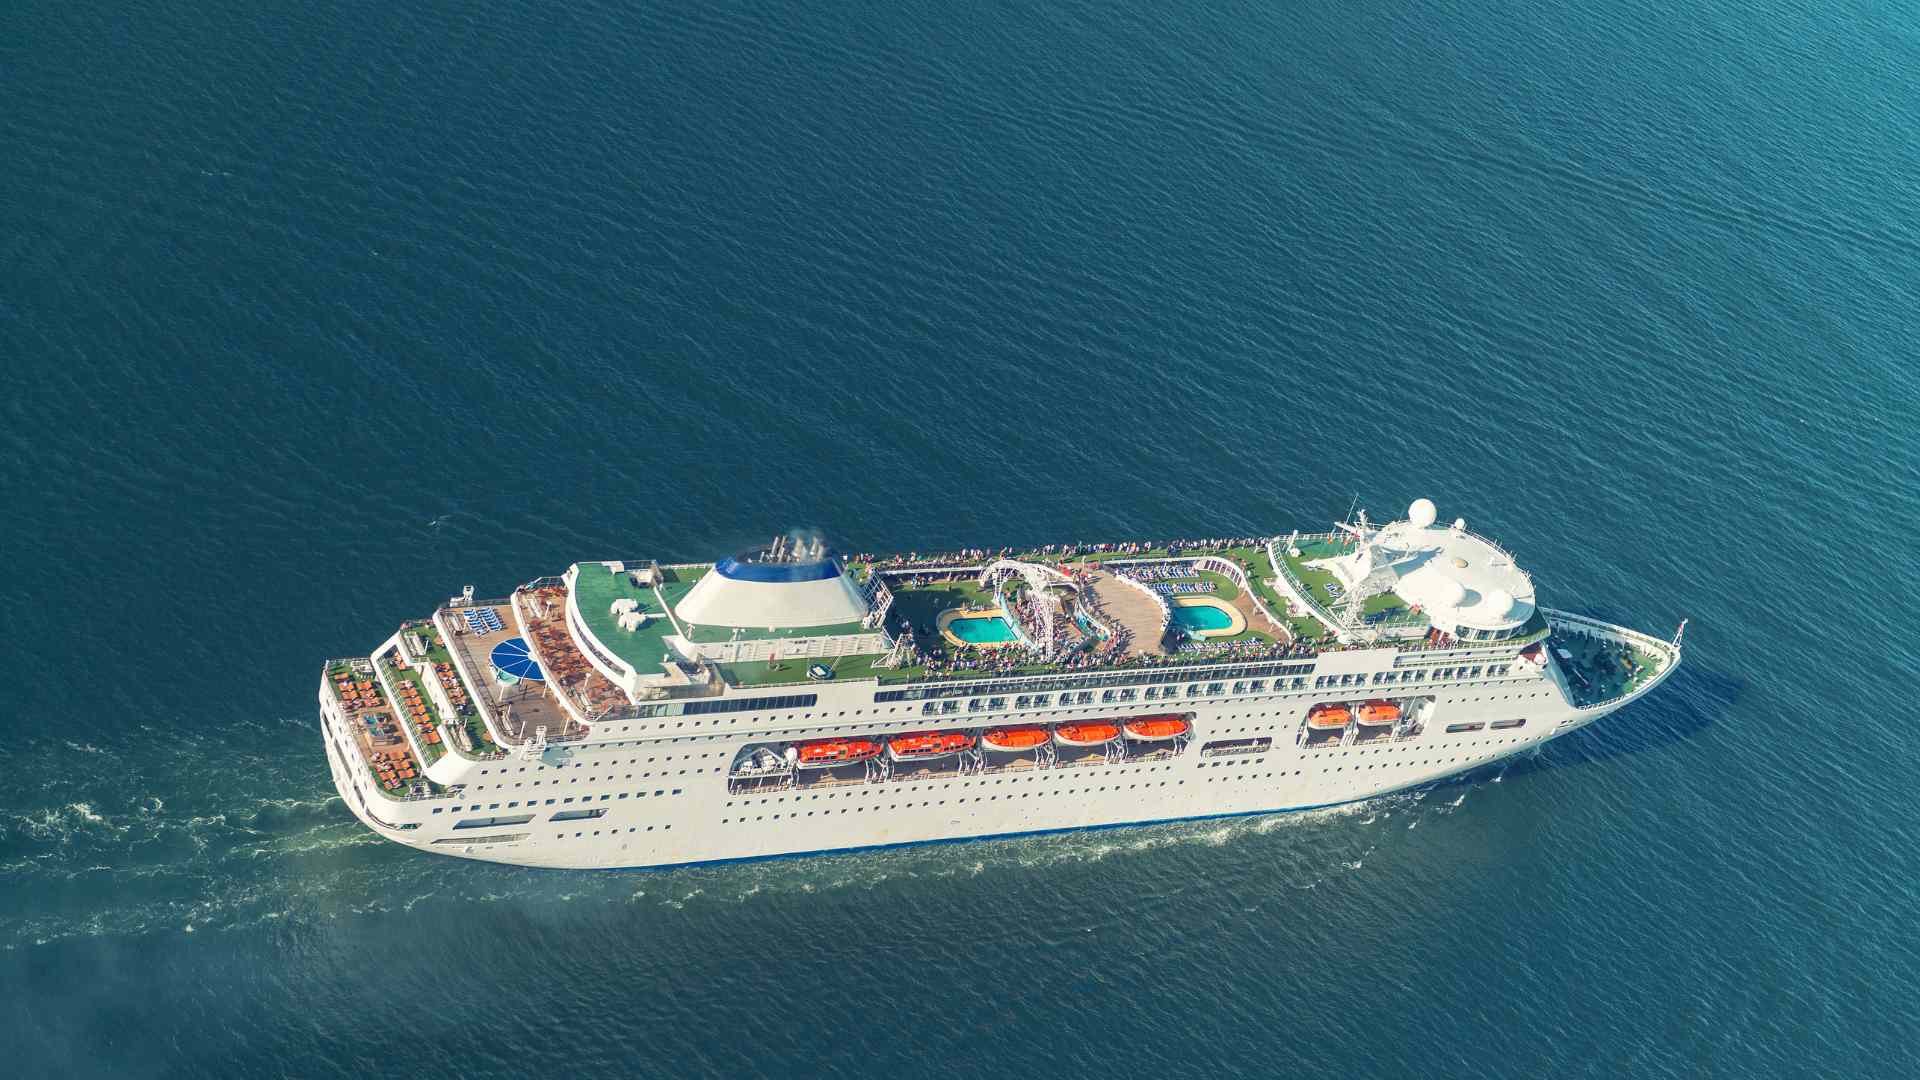 3-Day Cruise Without a Passport